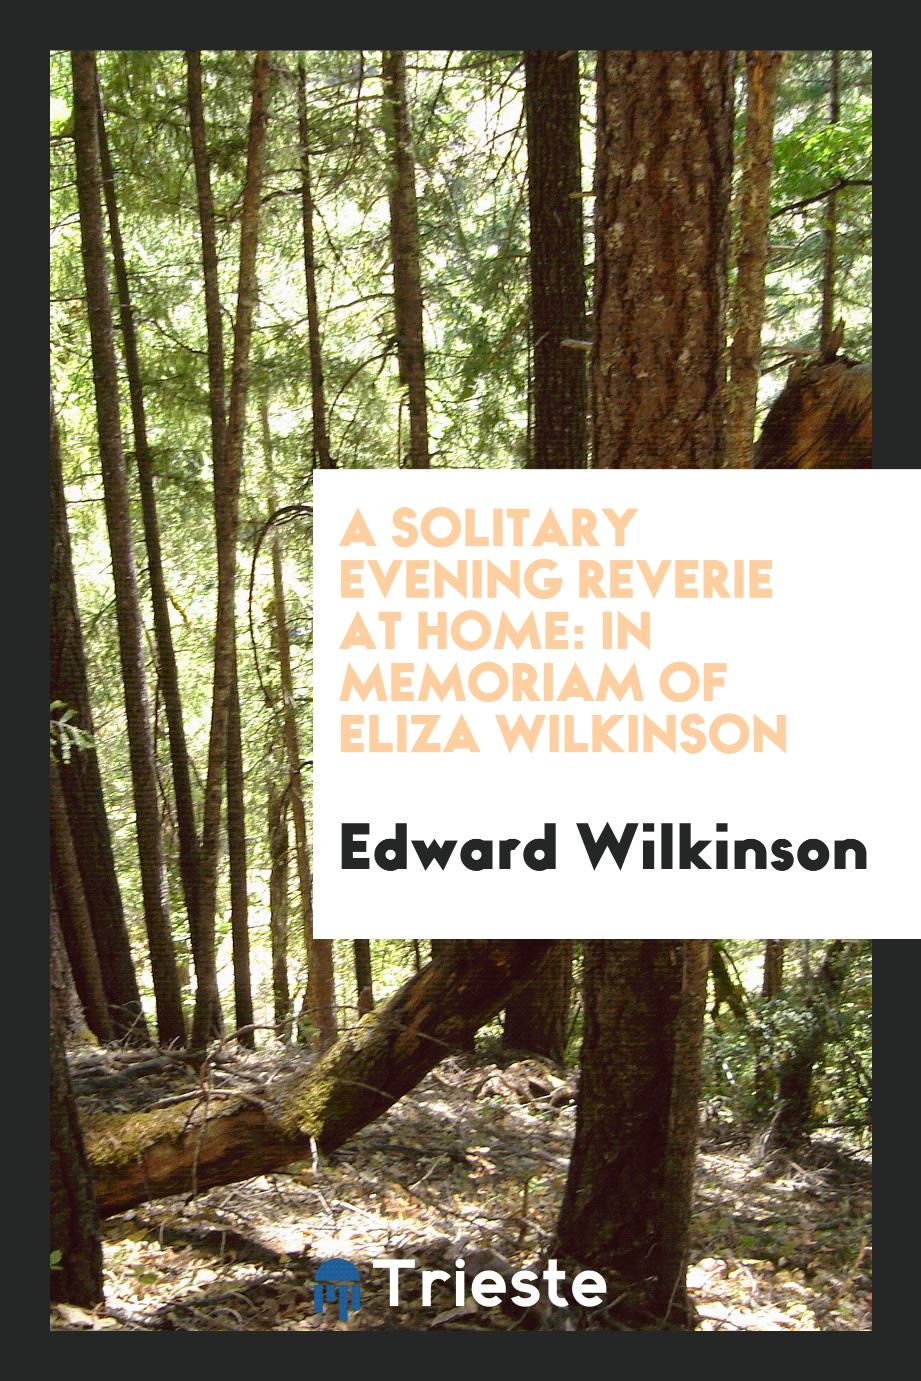 A Solitary Evening Reverie at Home: In Memoriam of Eliza Wilkinson